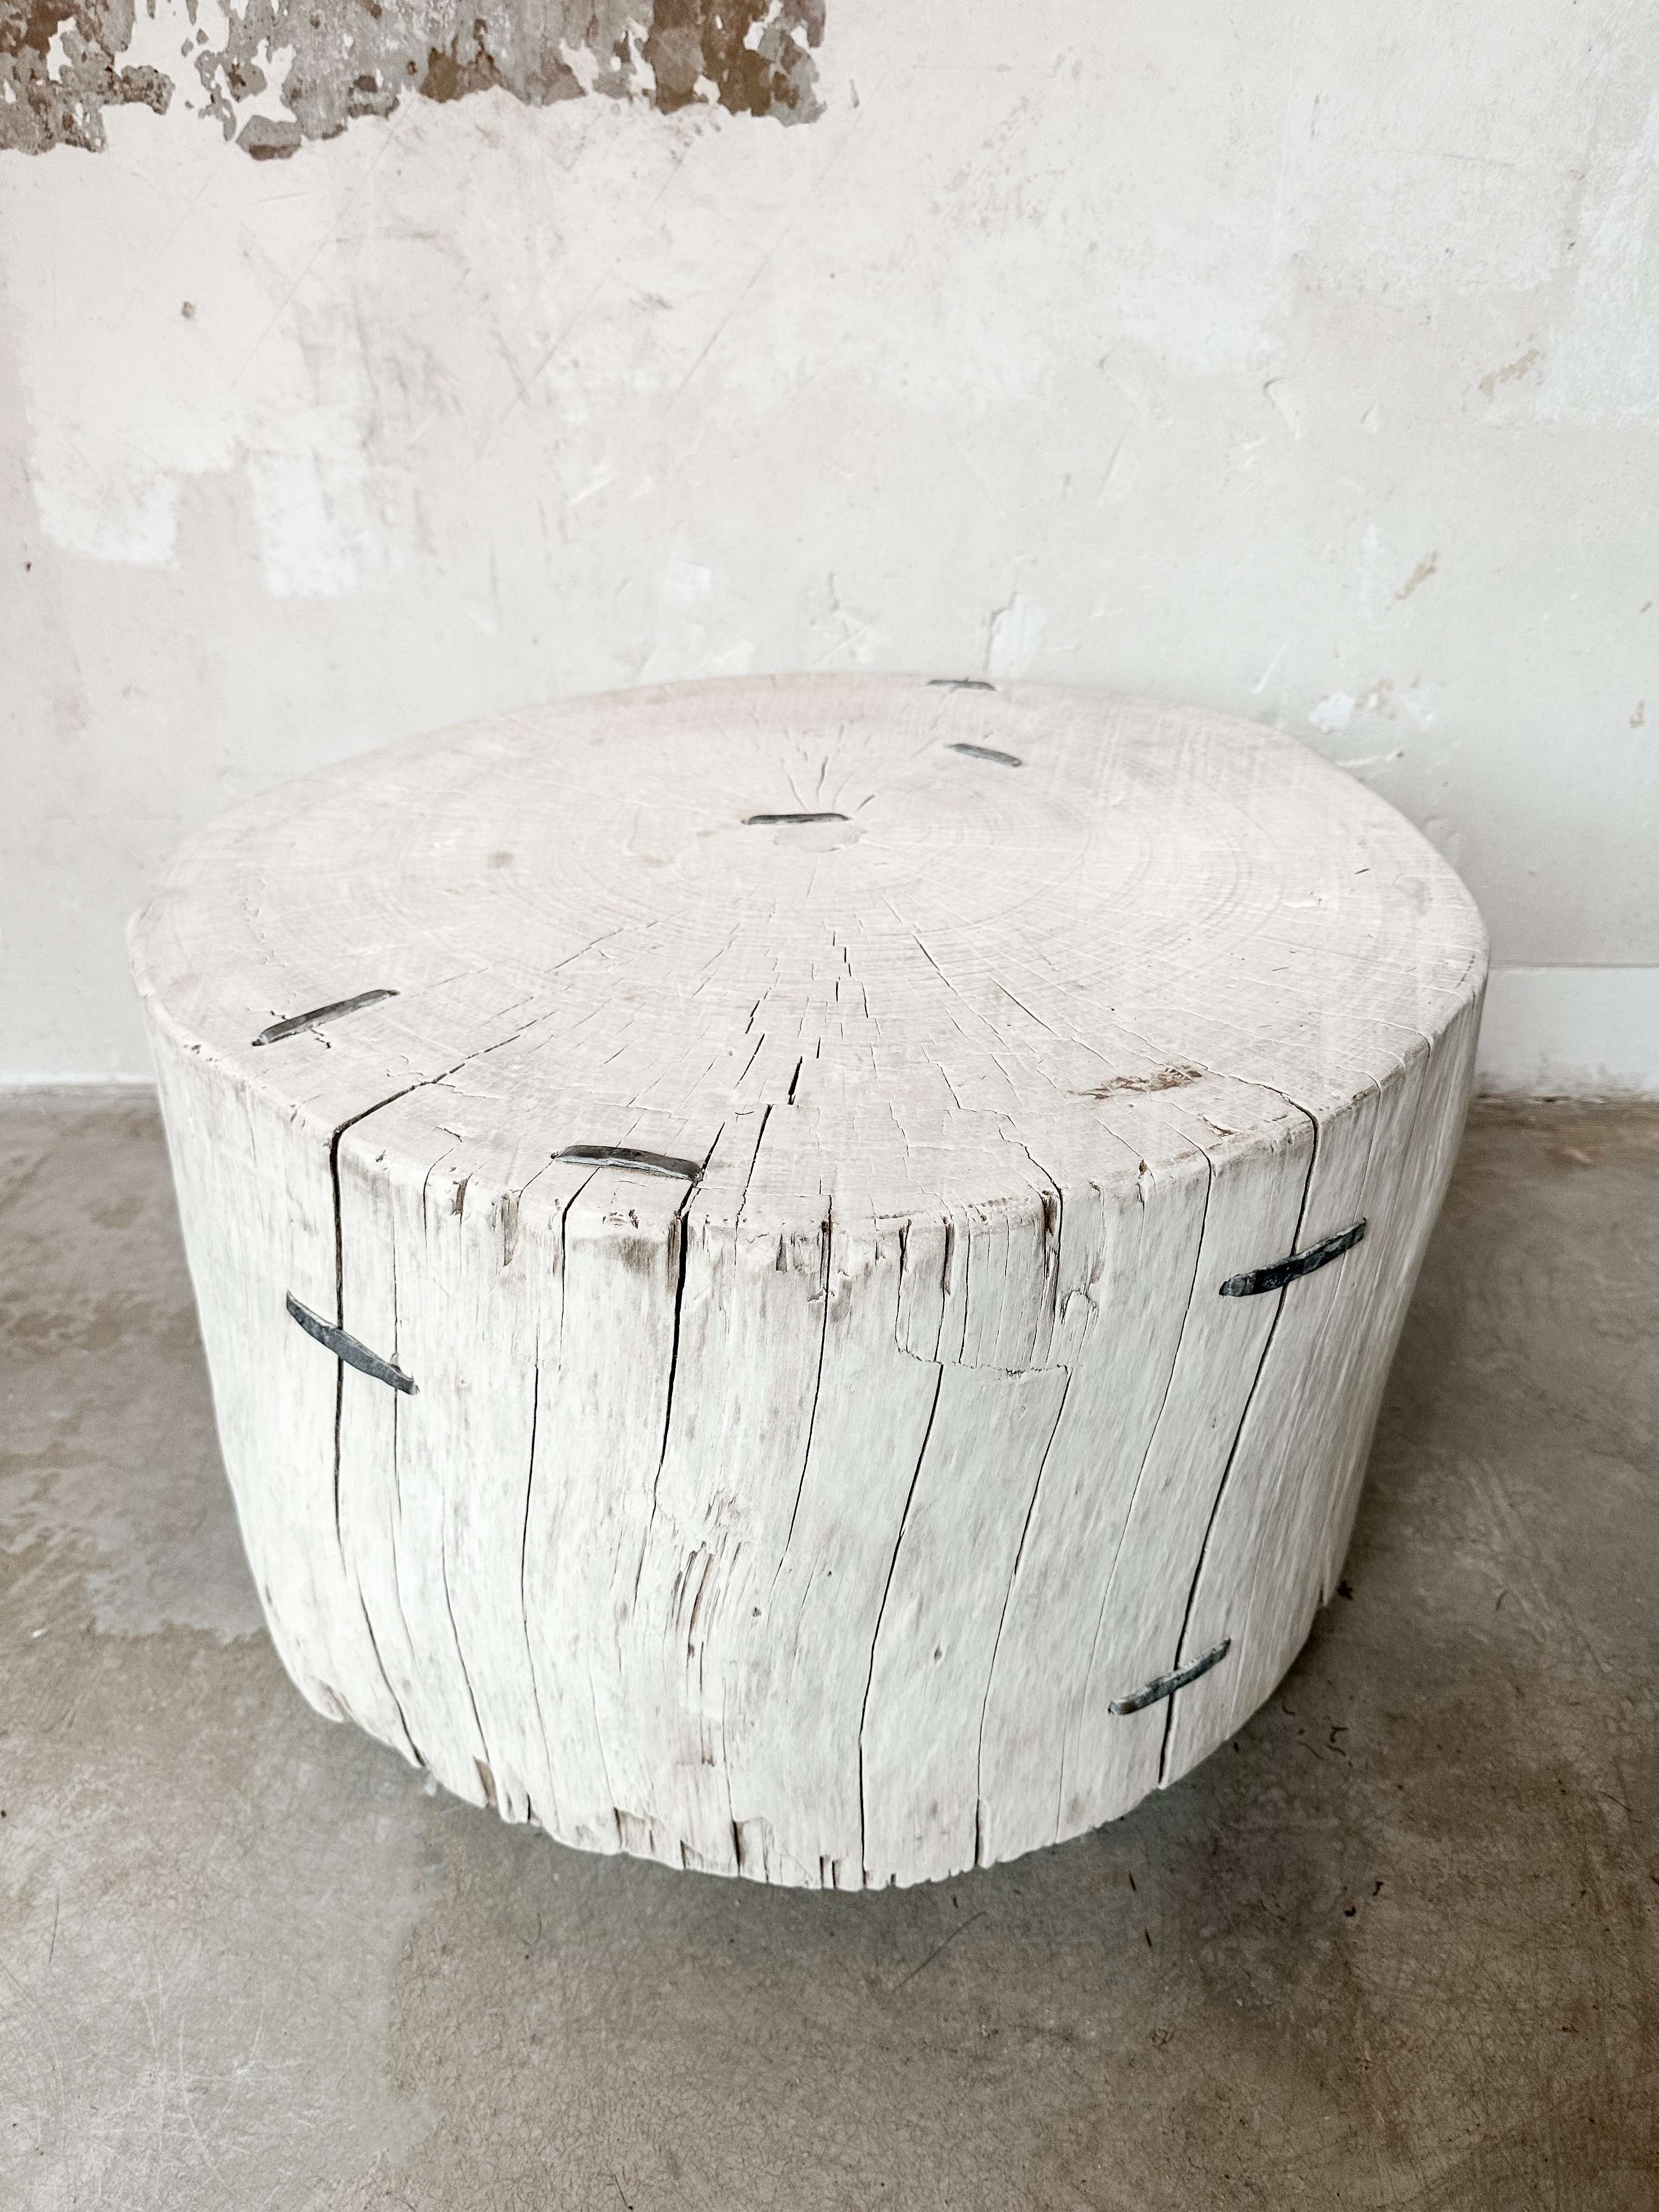 The coffee table "butcher's block round"